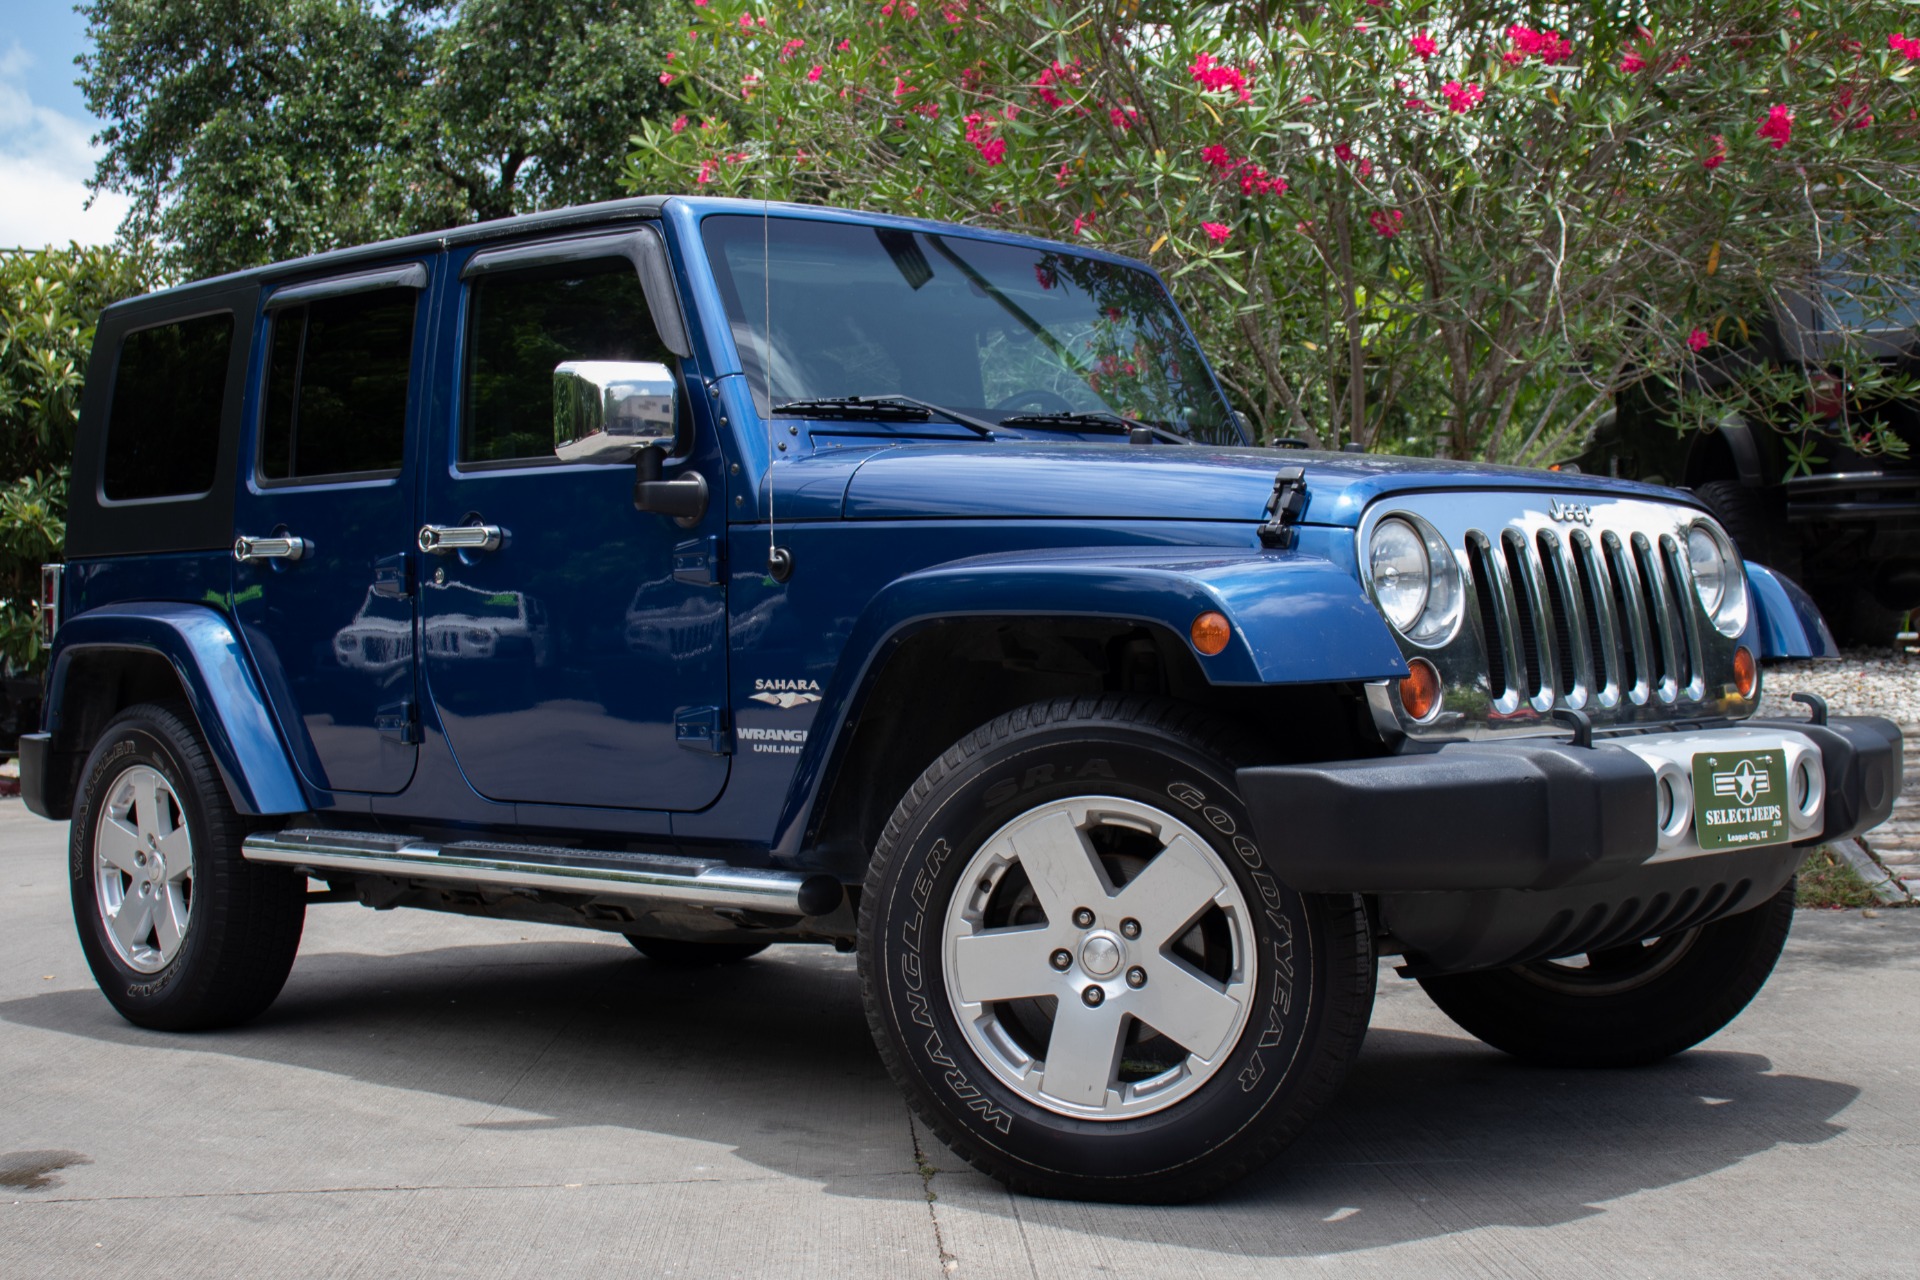 Used 2010 Jeep Wrangler Unlimited Sahara For Sale ($20,995) | Select 2010 Jeep Wrangler Unlimited Sahara Towing Capacity